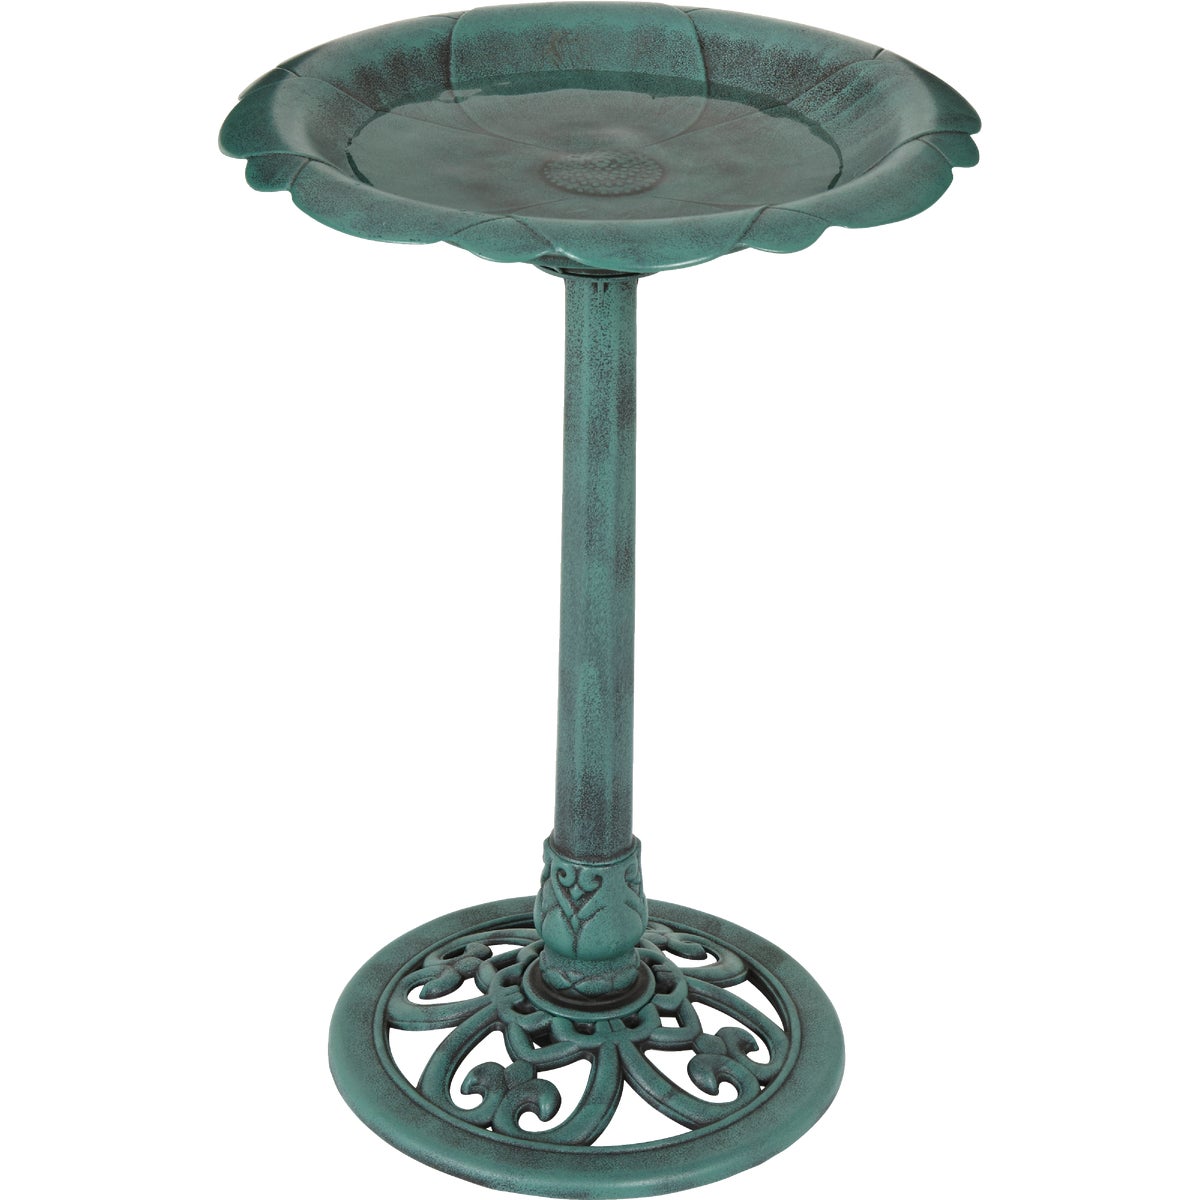 Item 703318, Flower design bird bath is made of weather resistant poly resin with an 